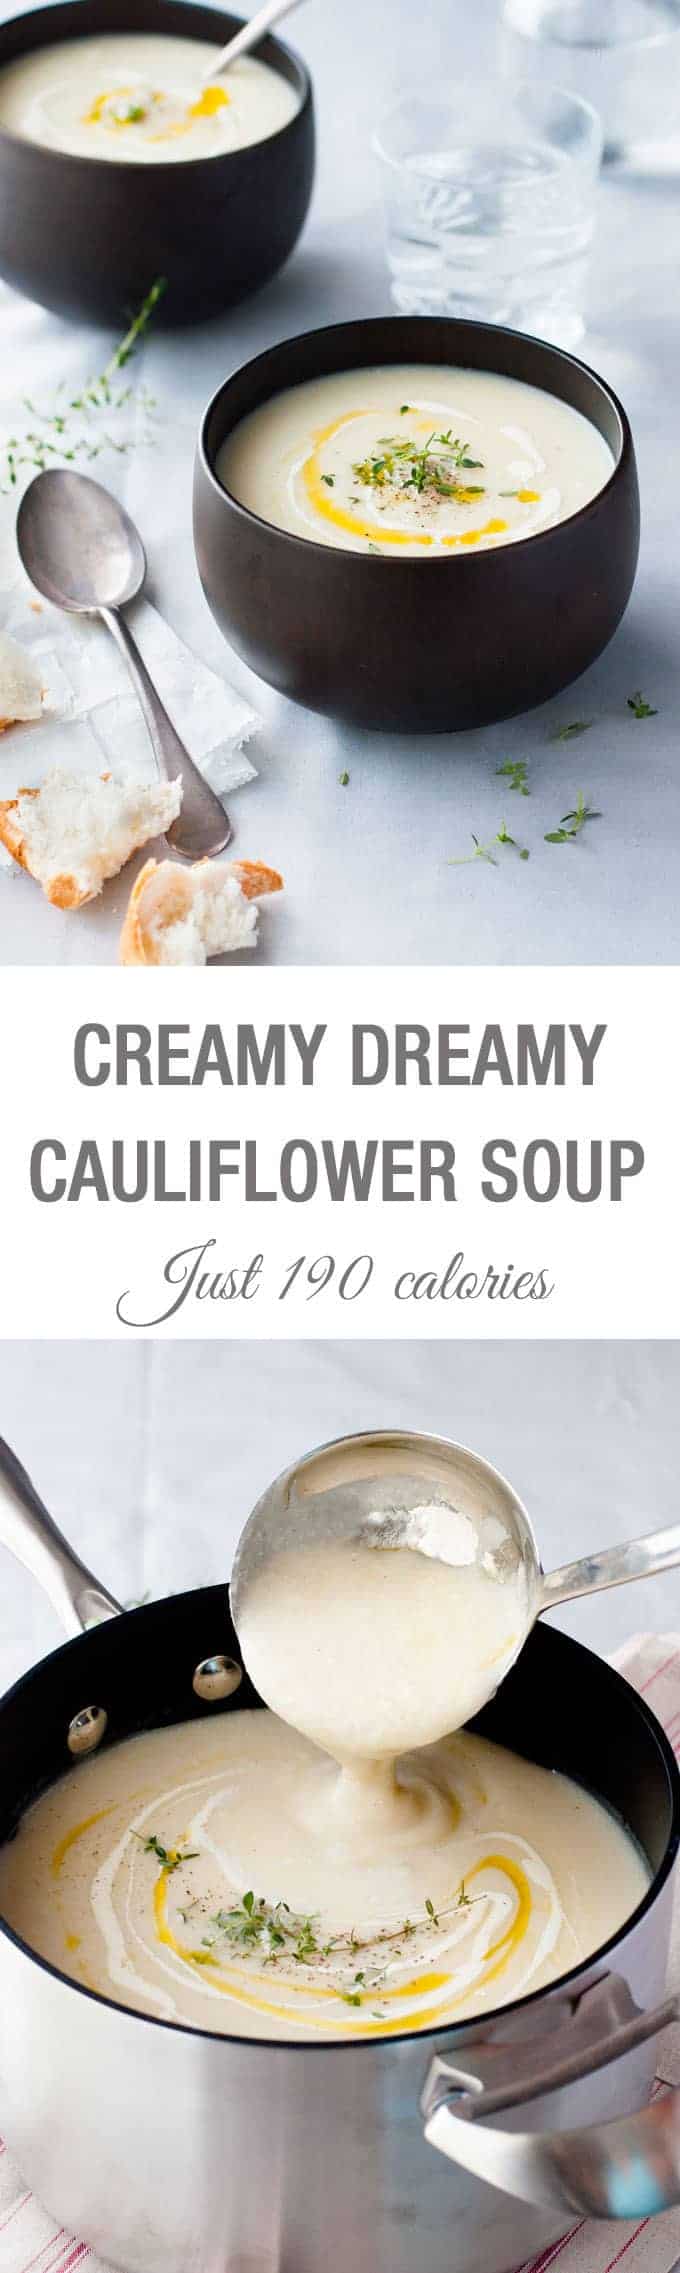 Creamy Dreamy Cauliflower Soup - just 190 calories for a BIG bowl, effortless to make and soooo creamy!